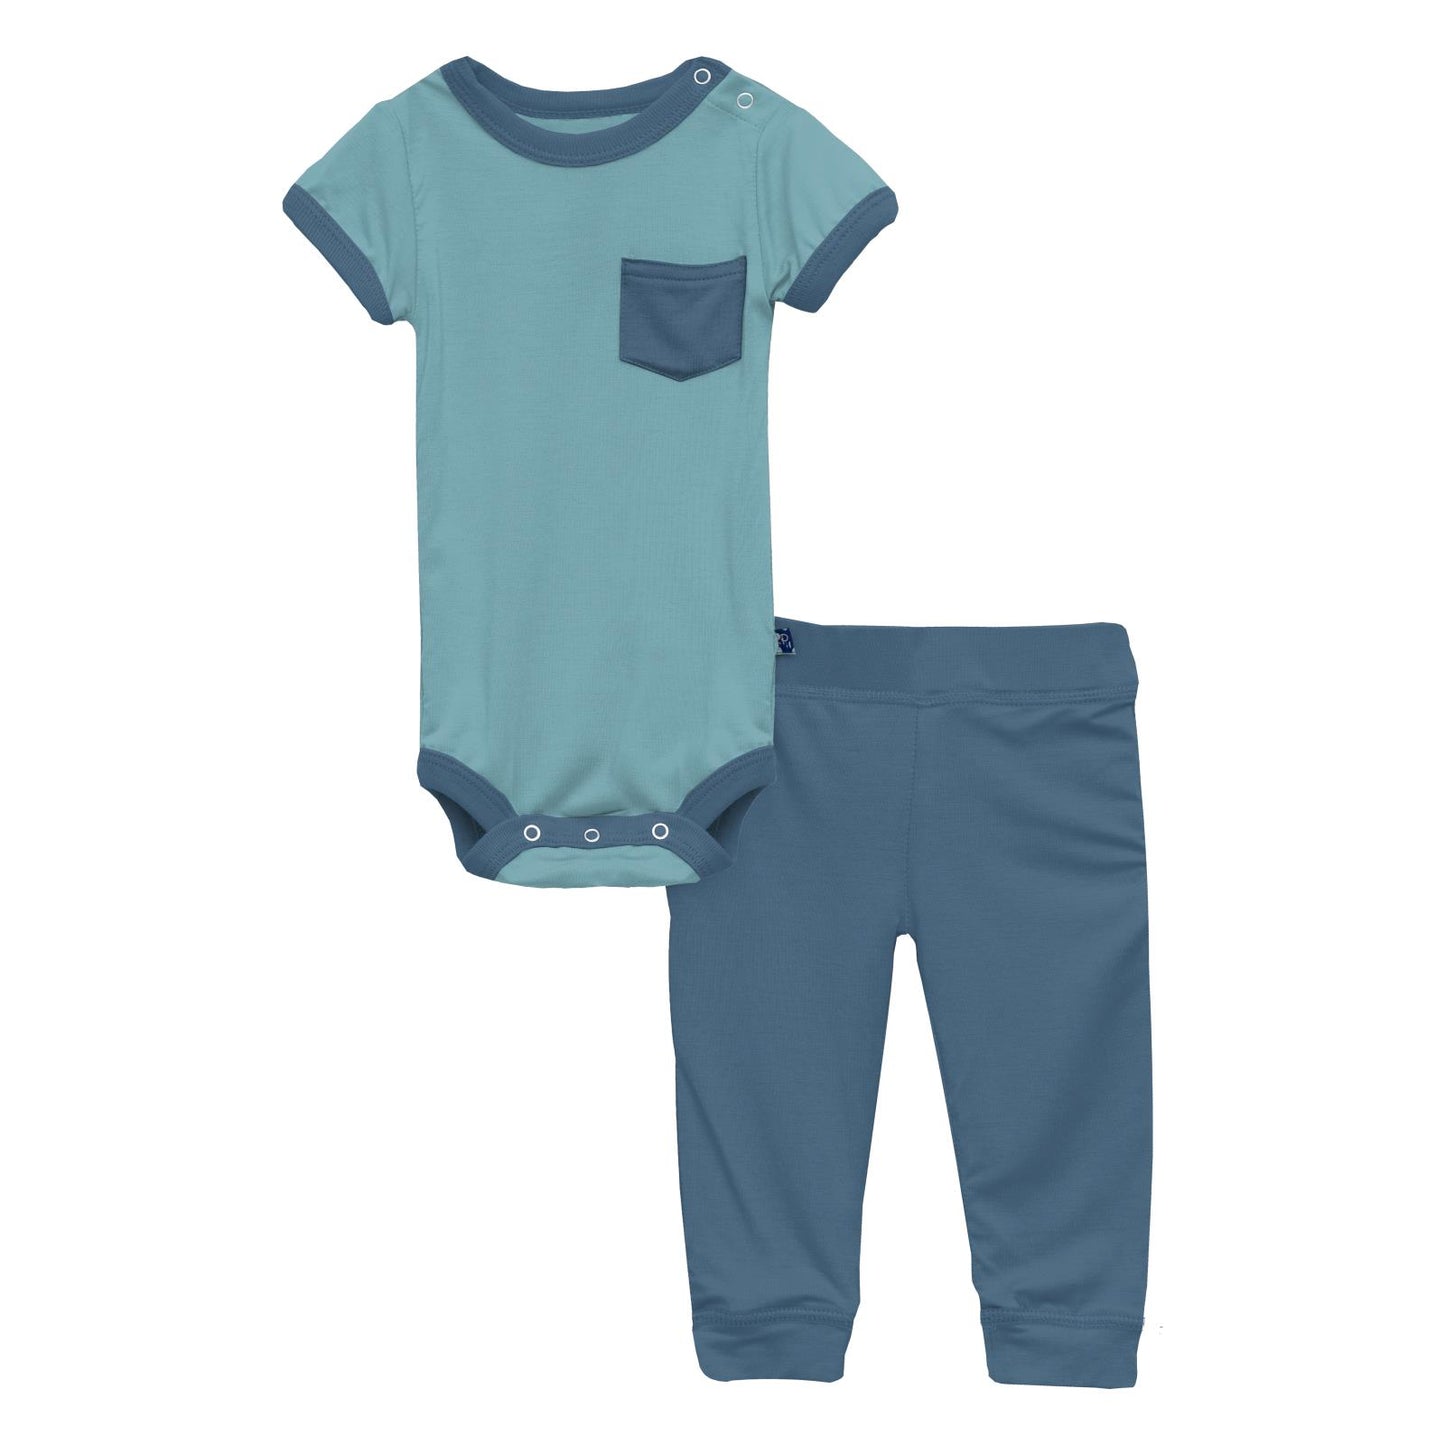 Kickee Pants Short Sleeve Pocket One Piece & Pants Outfit Set in Glacier with Twilight